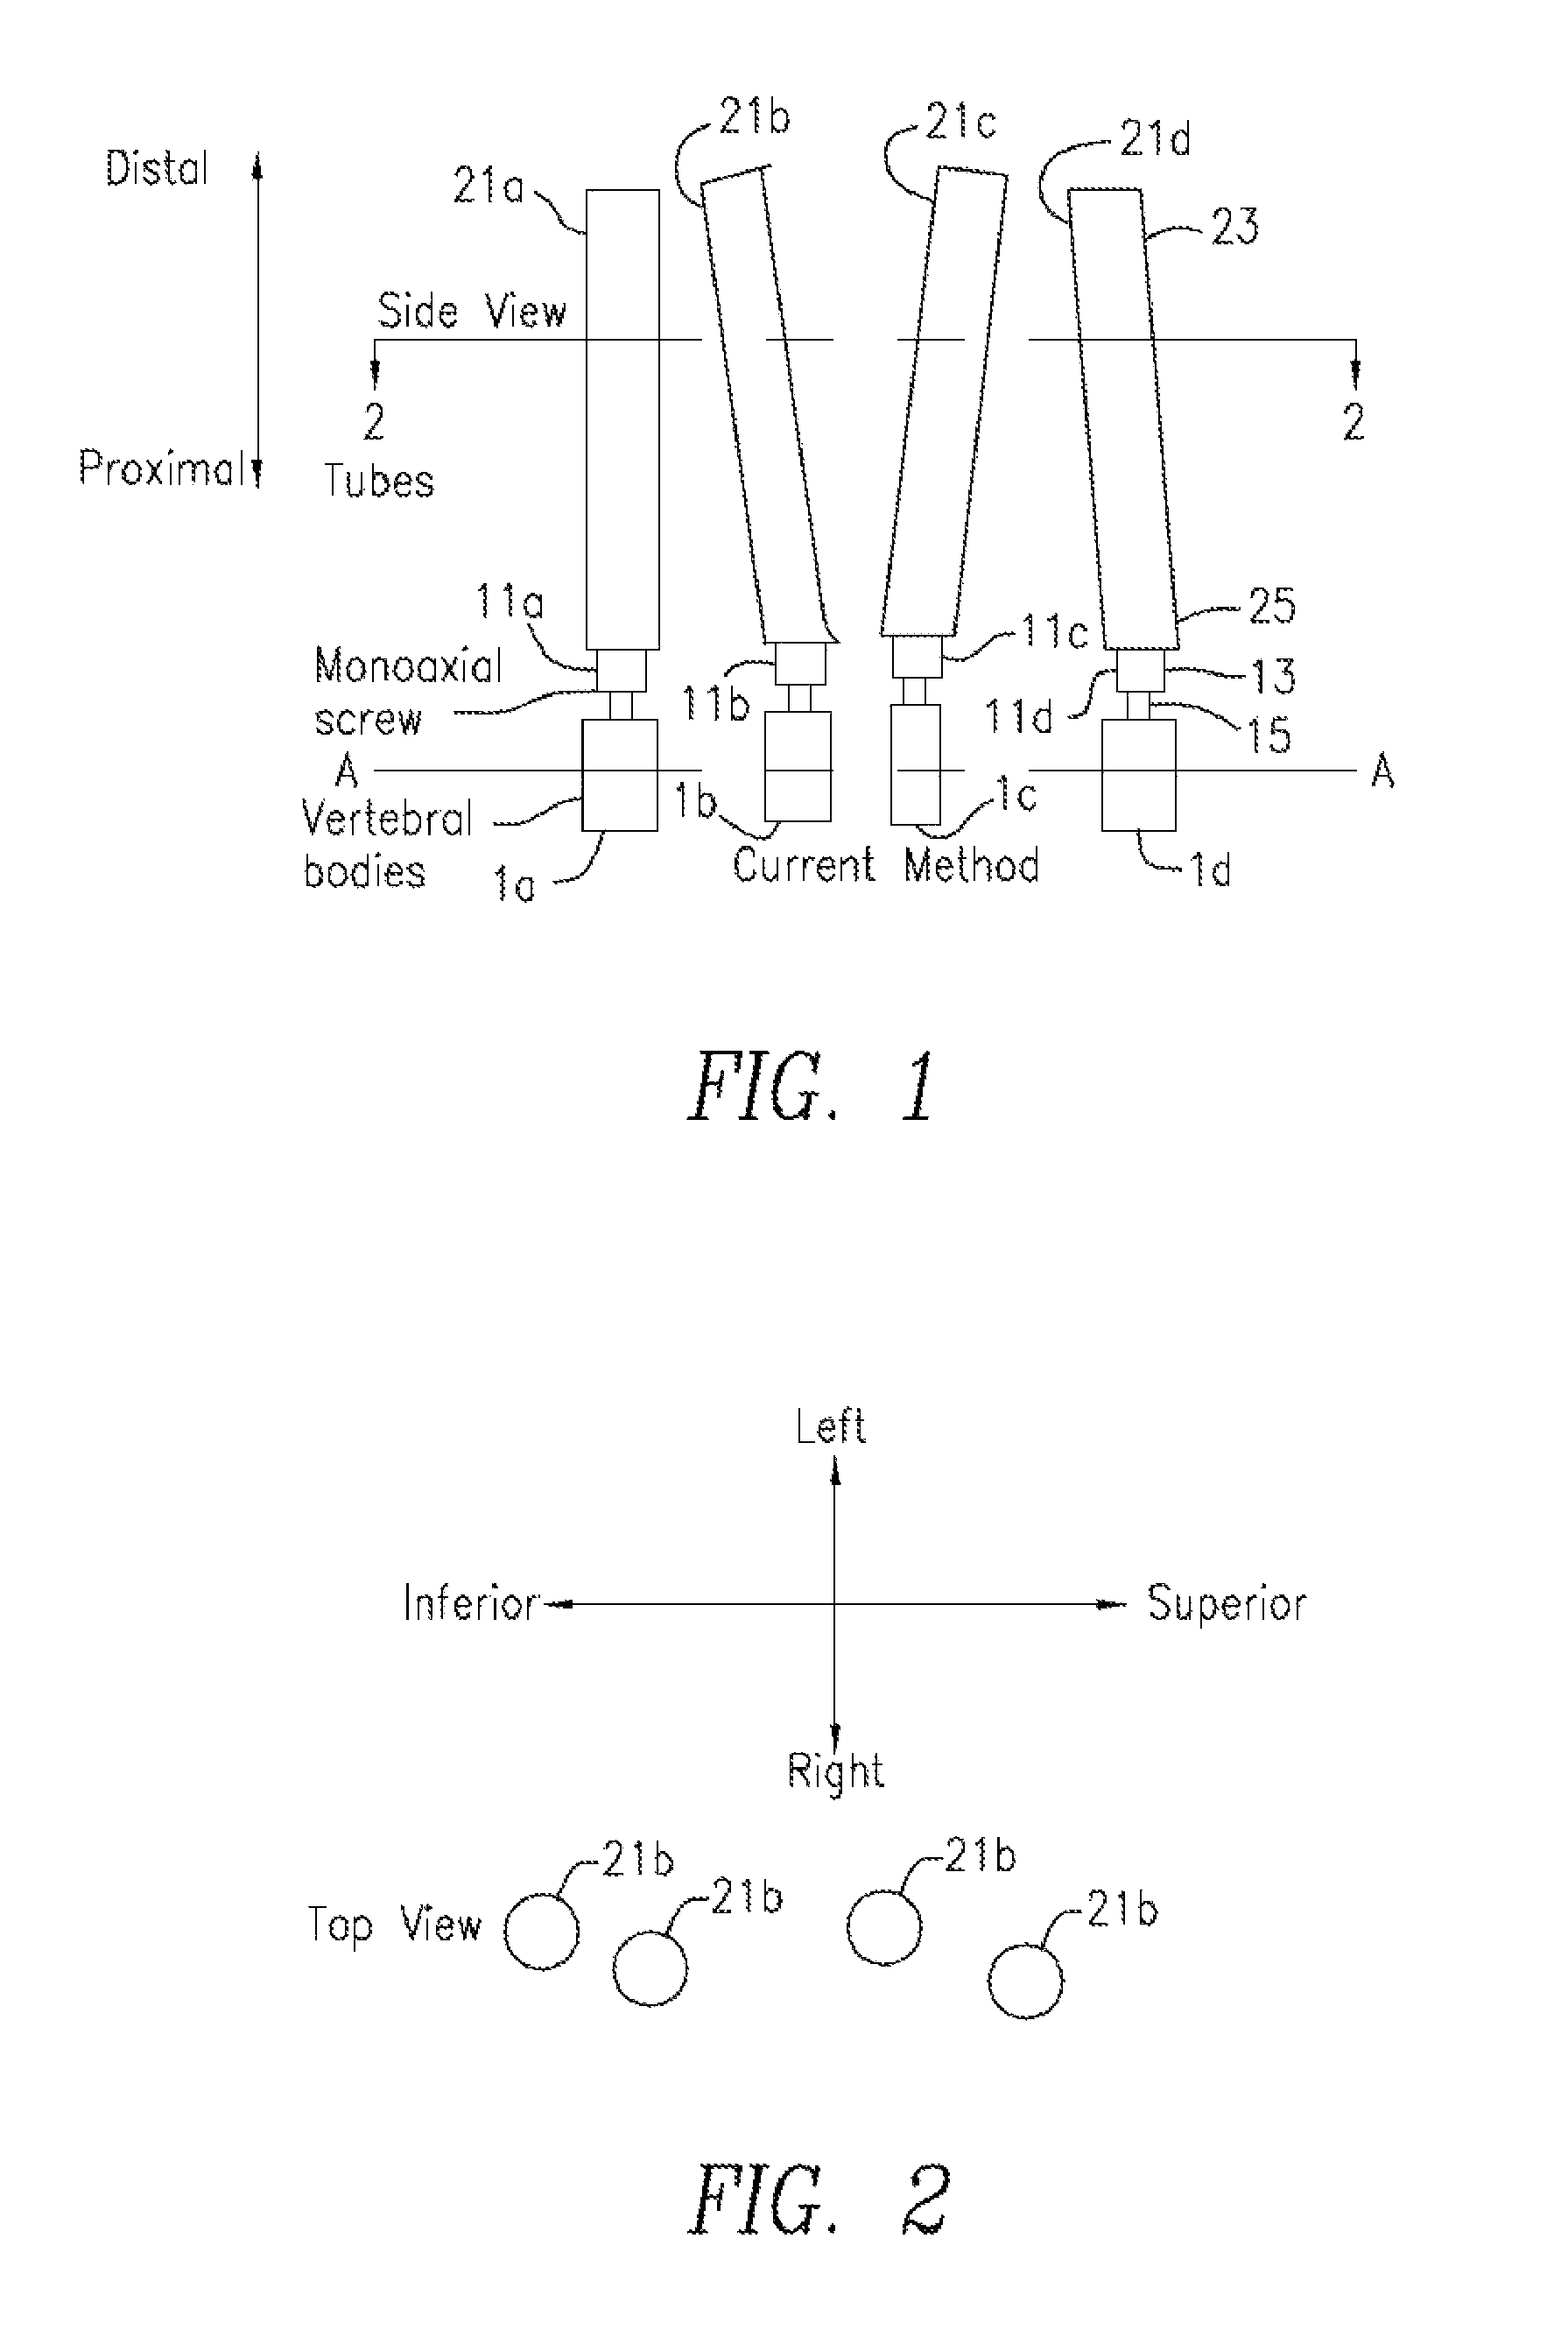 Apparatus and method for direct vertebral rotation